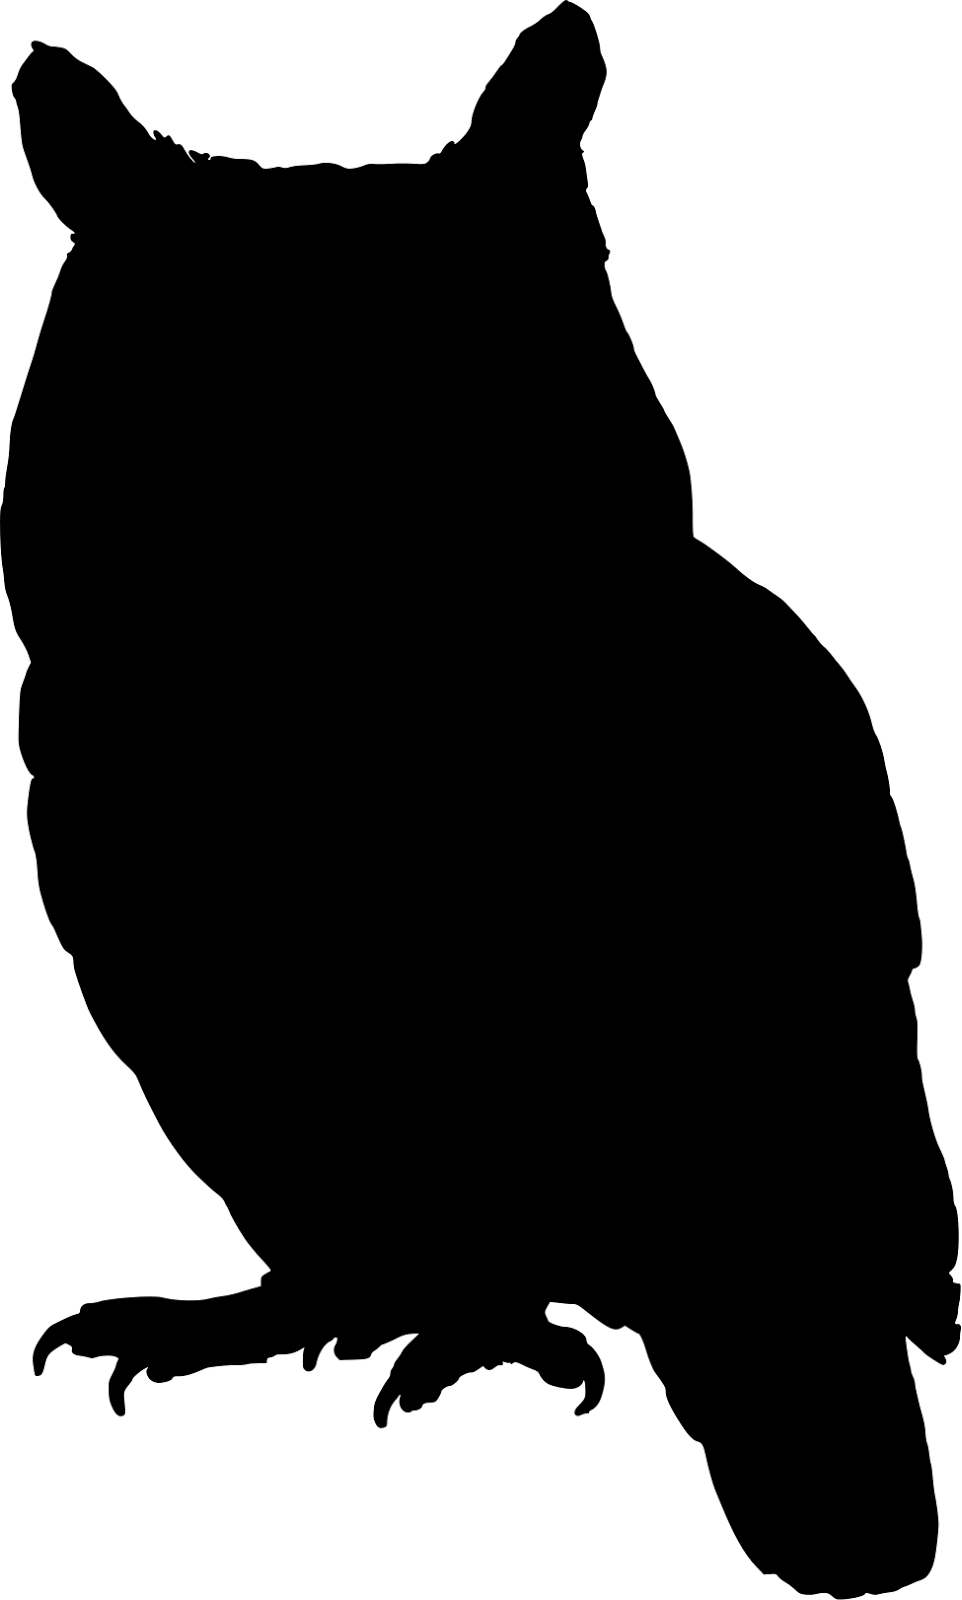 12 Silhouette Of Screech Owl   Free Cliparts That You Can Download To